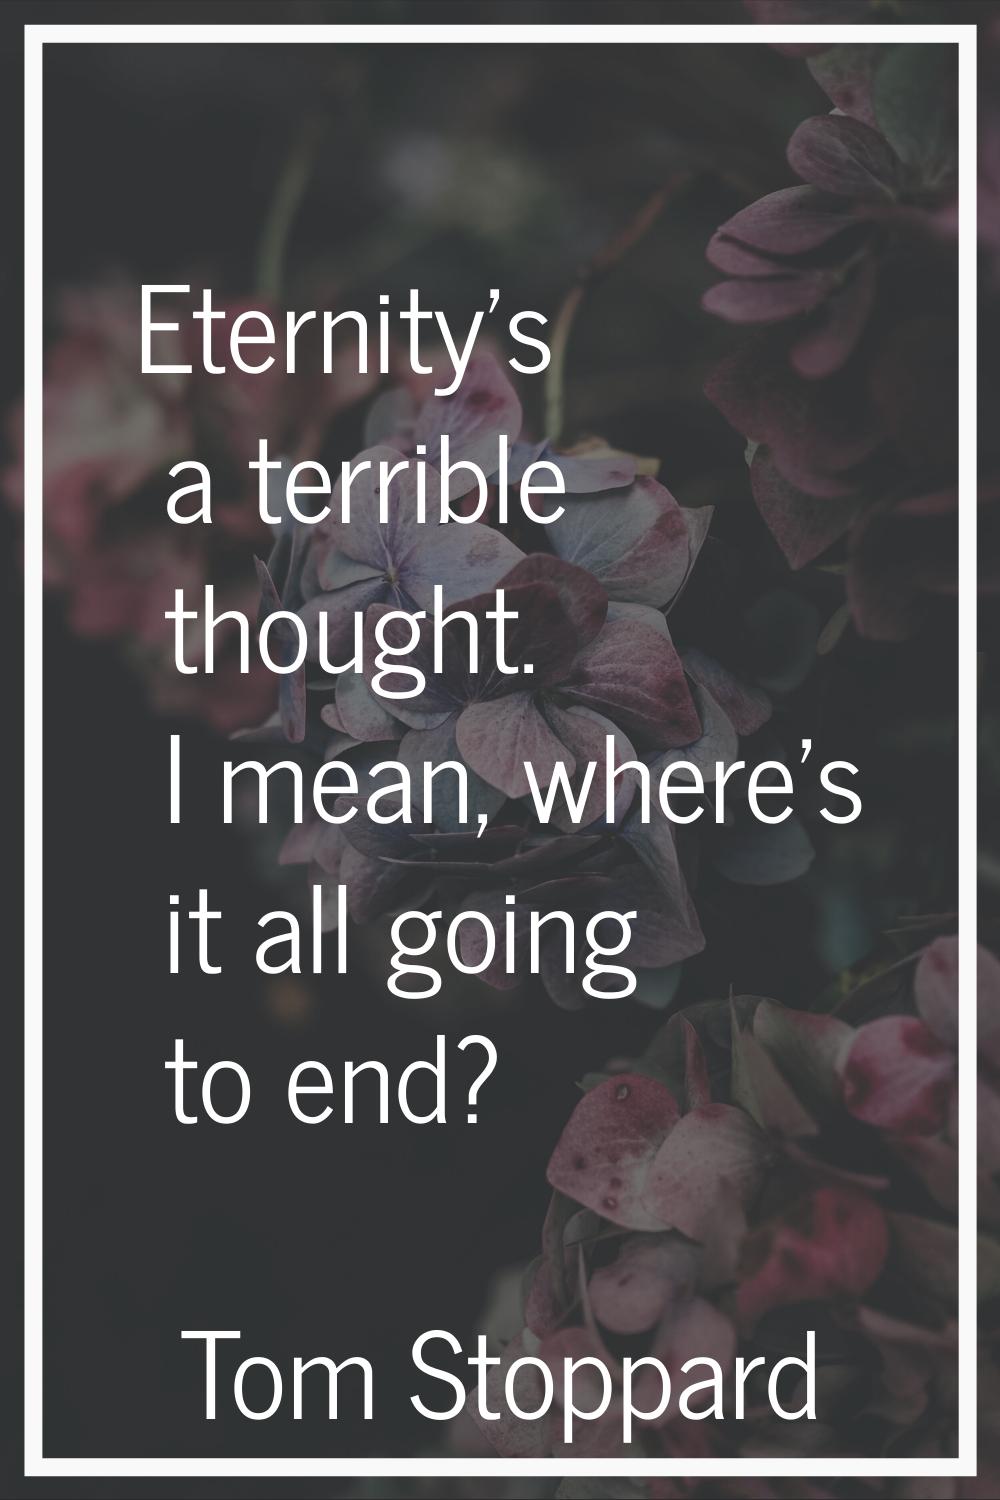 Eternity's a terrible thought. I mean, where's it all going to end?